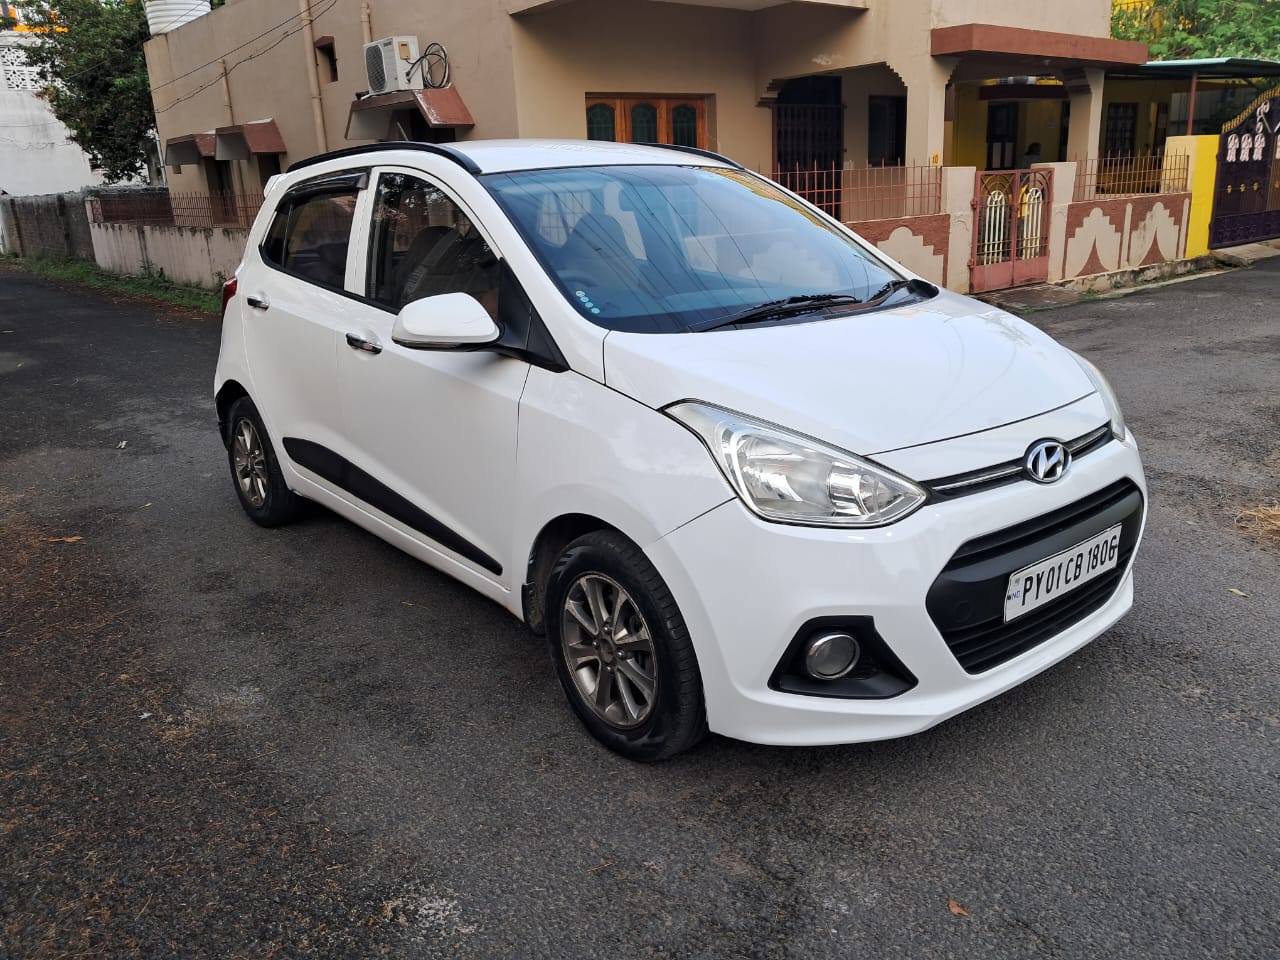 6595-for-sale-Hyundai-Grand-i10-Diesel-First-Owner-2014-PY-registered-rs-0